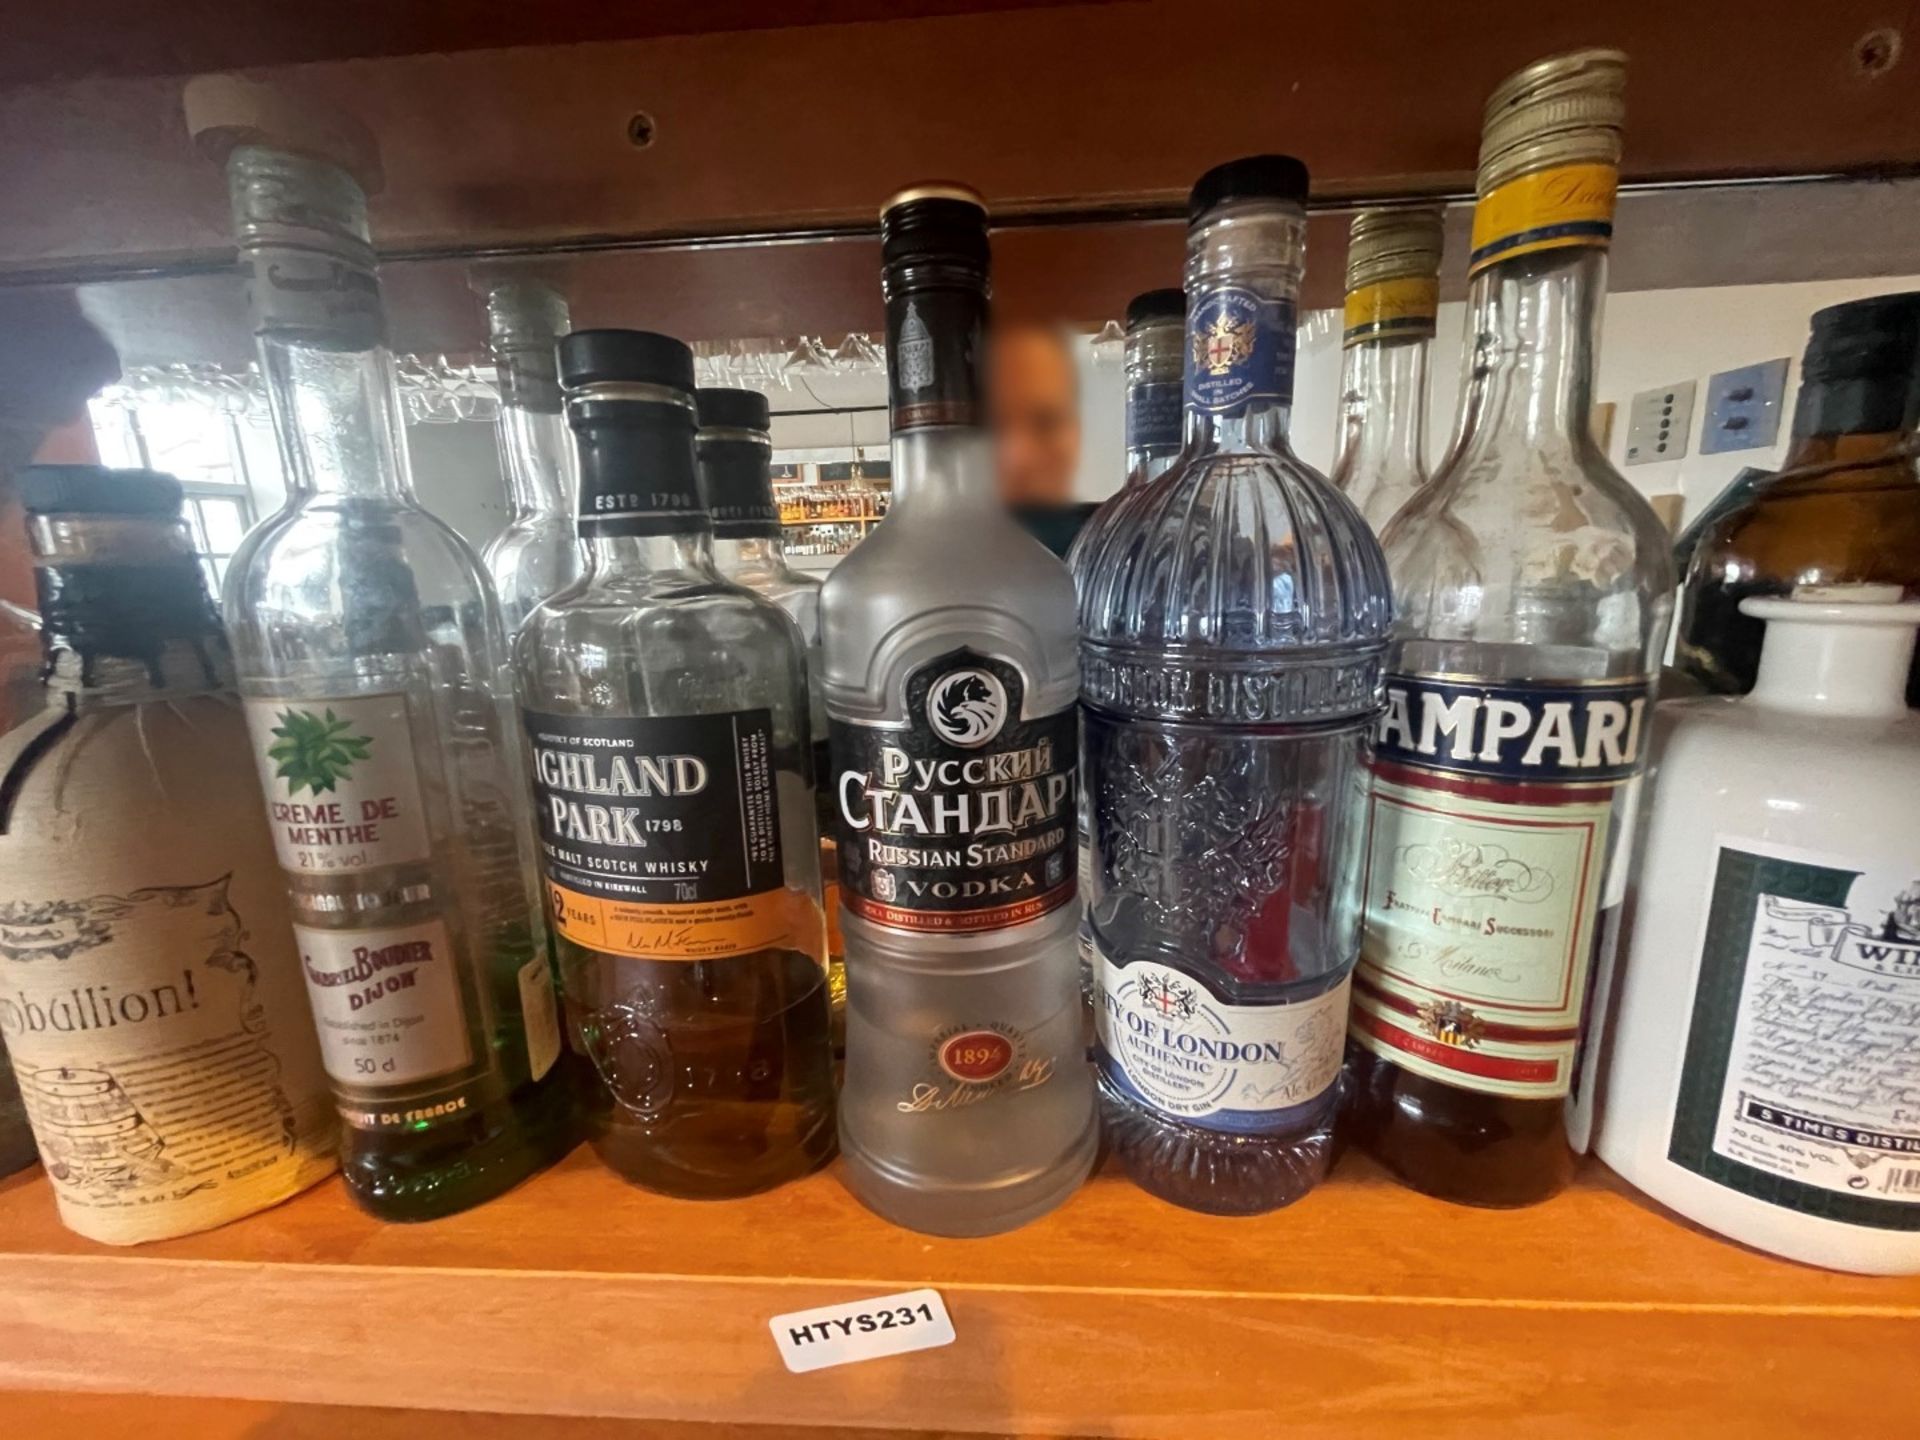 13 x Bottles of Various Spirits Including Sambuca, Vodka, Whisky, Gin, Rum and More - Part Used Open - Image 5 of 14